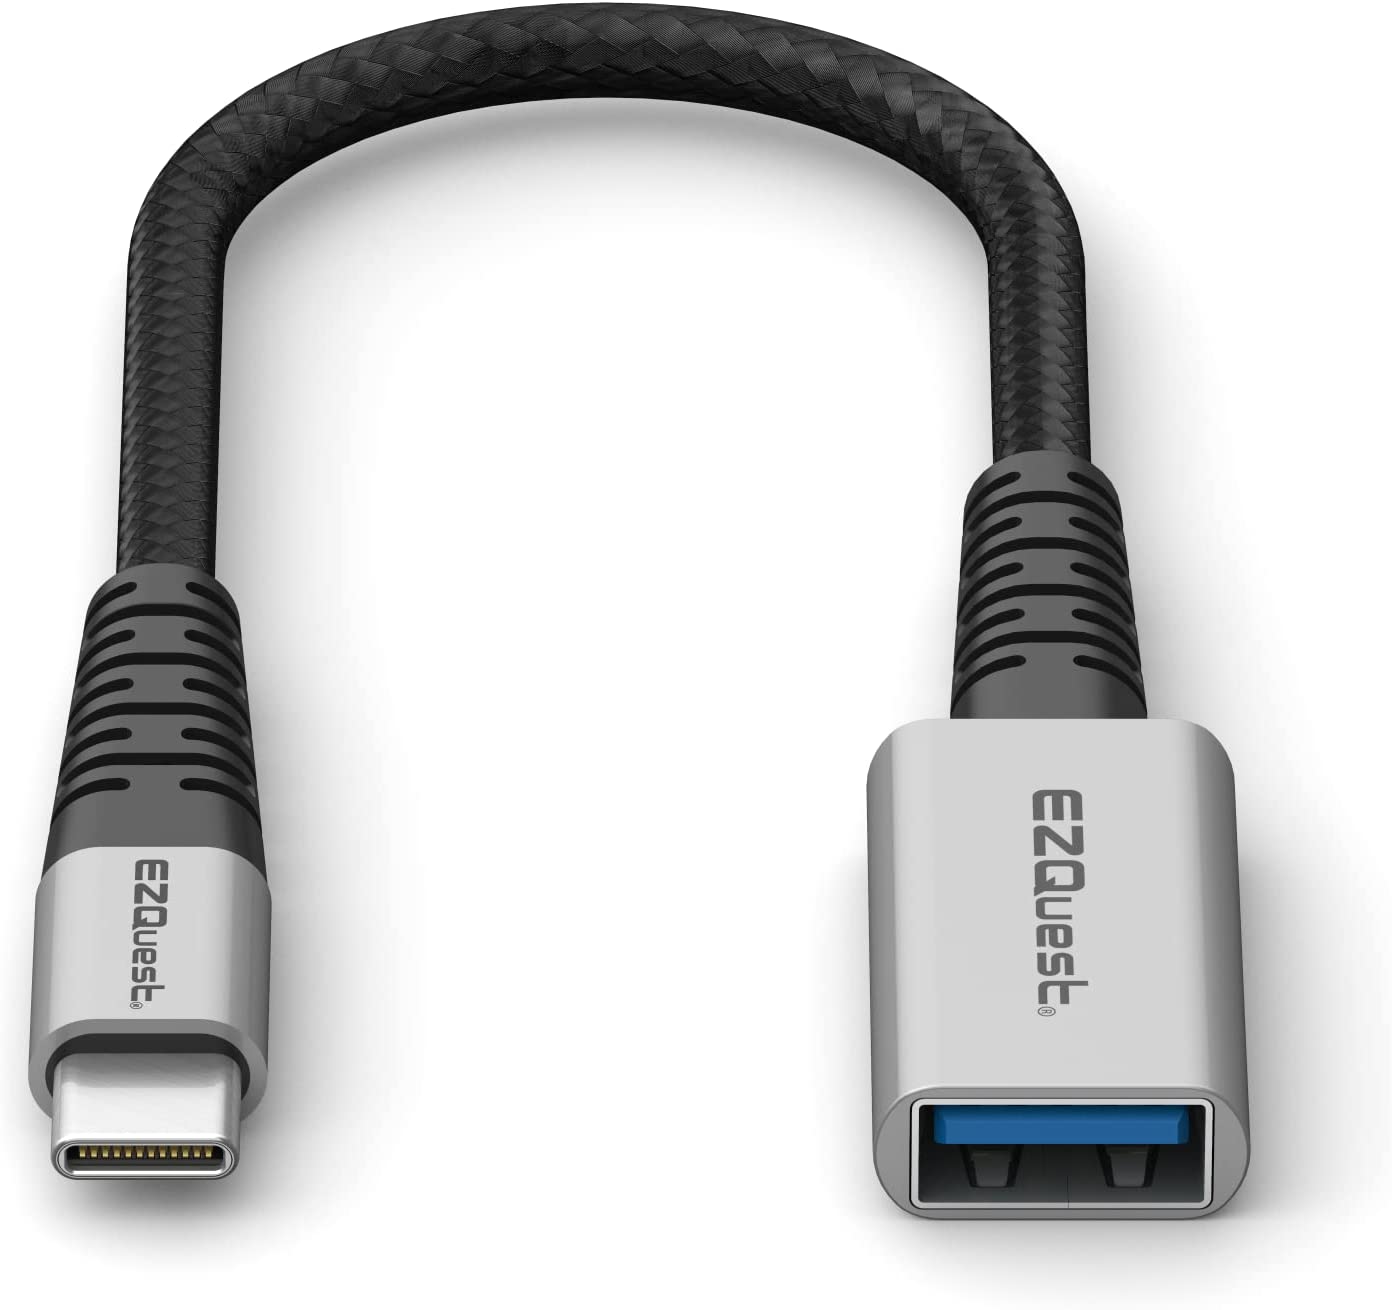 Ezquest DuraGuard™ USB-C to USB-A 3.0 Female Cable Adapter